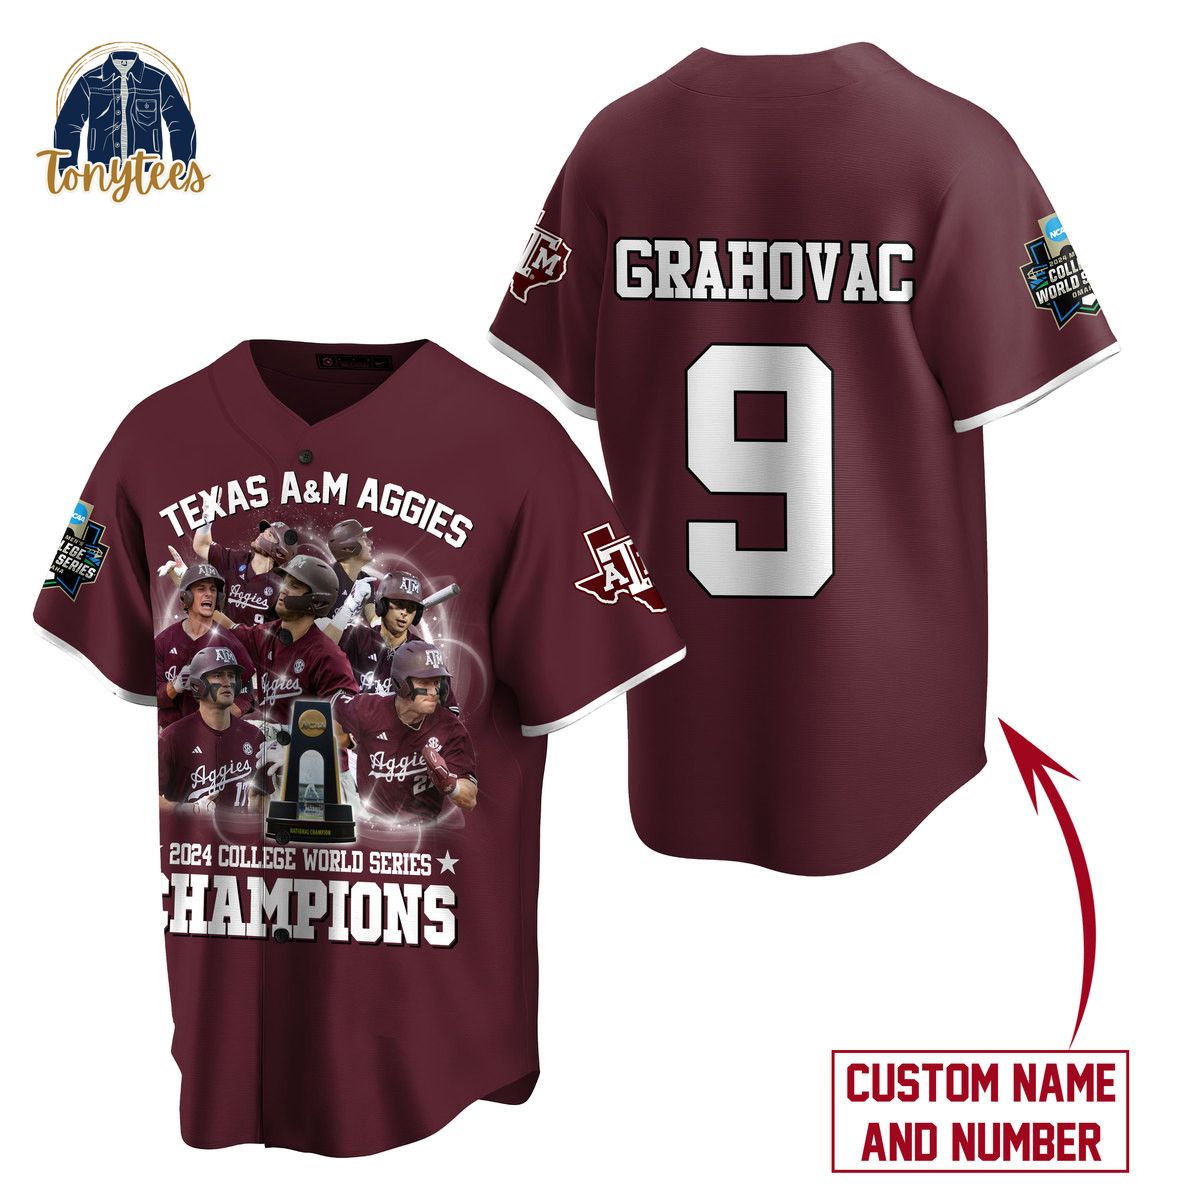 Texas A&M Aggies 2024 college world series champions personalized baseball jersey